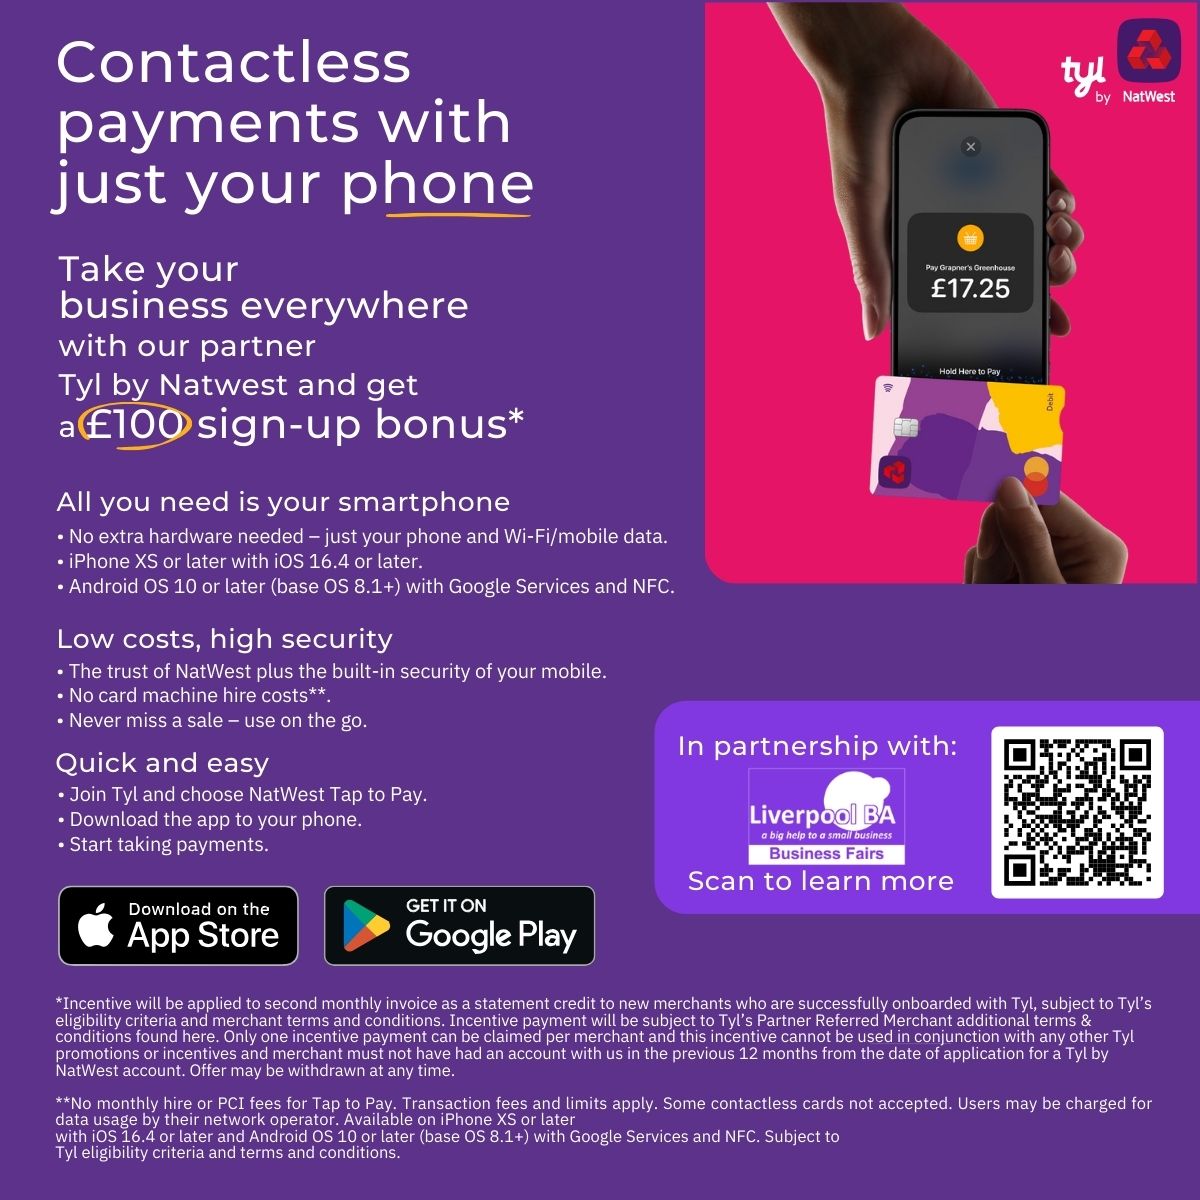 Join Liverpool BA’s payment partner @TylByNatWest and take contactless payments using just your phone ➕ get a sign up bonus of £100 when you join using this link ⬇️ tylbynatwest.com/liverpool-busi… #paymentsolutions #ContactlessPayments #itstimefortyl